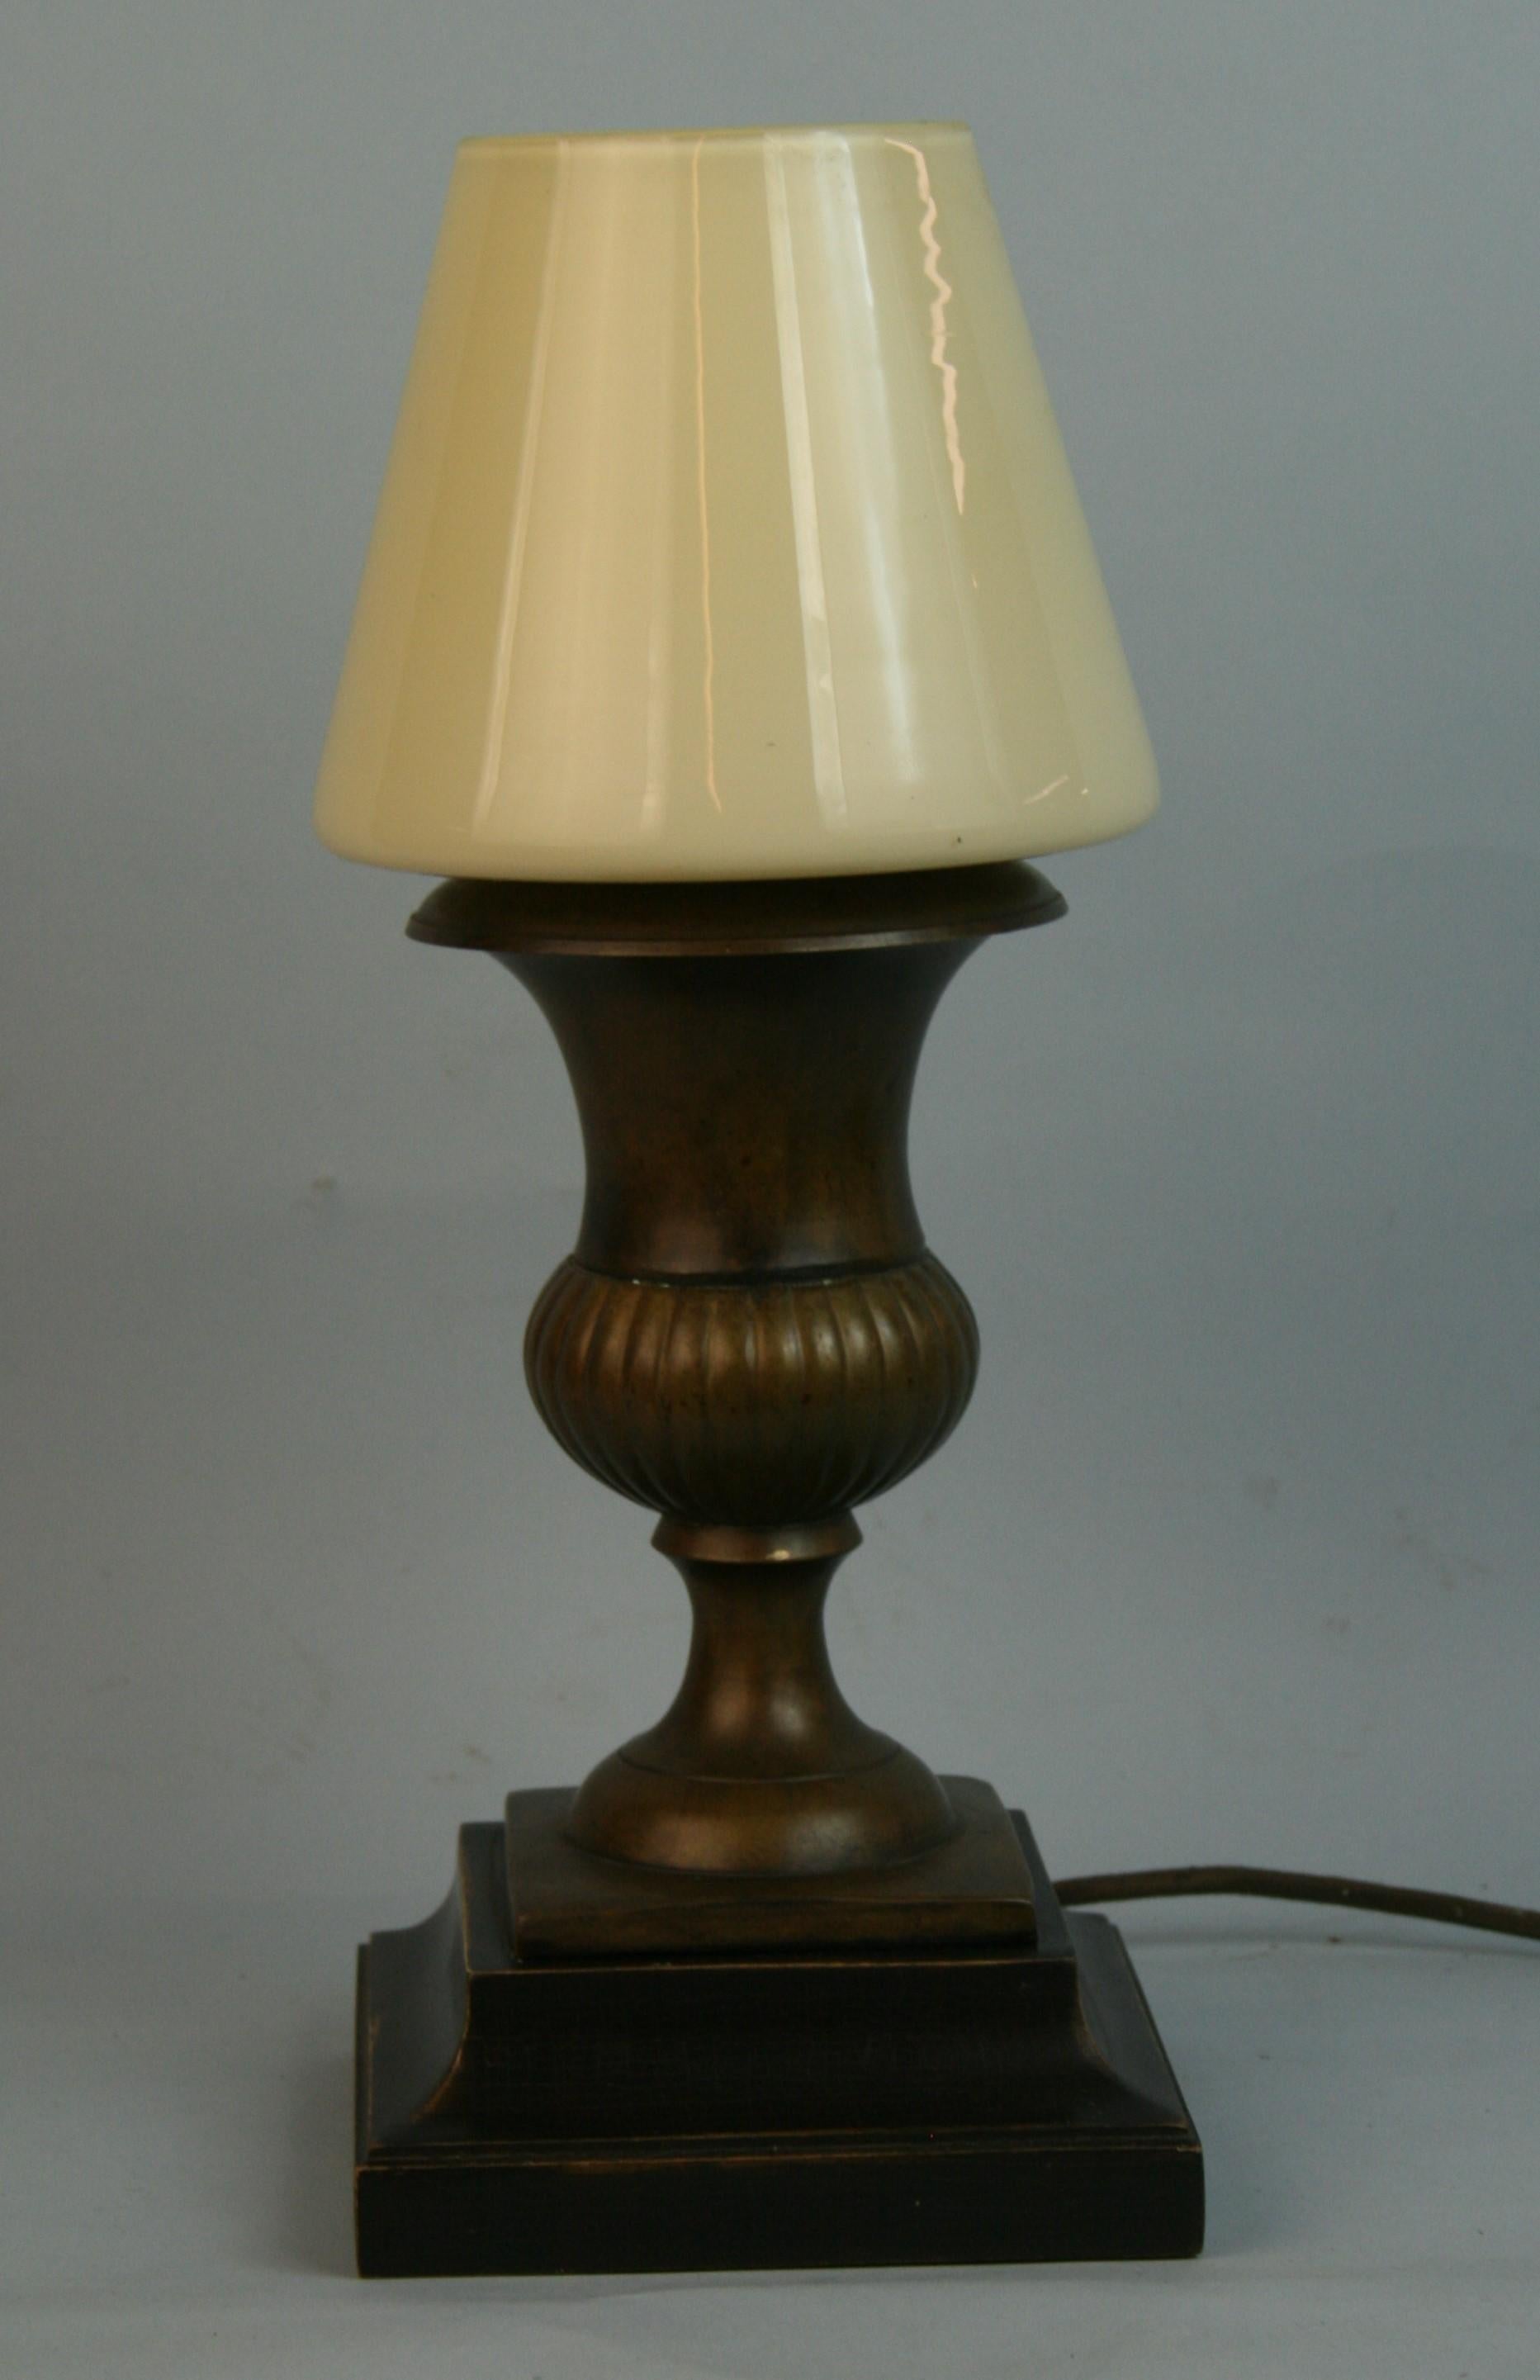 1300 Italian brass urn lamp with Murano art glass shade
2 available priced individually.